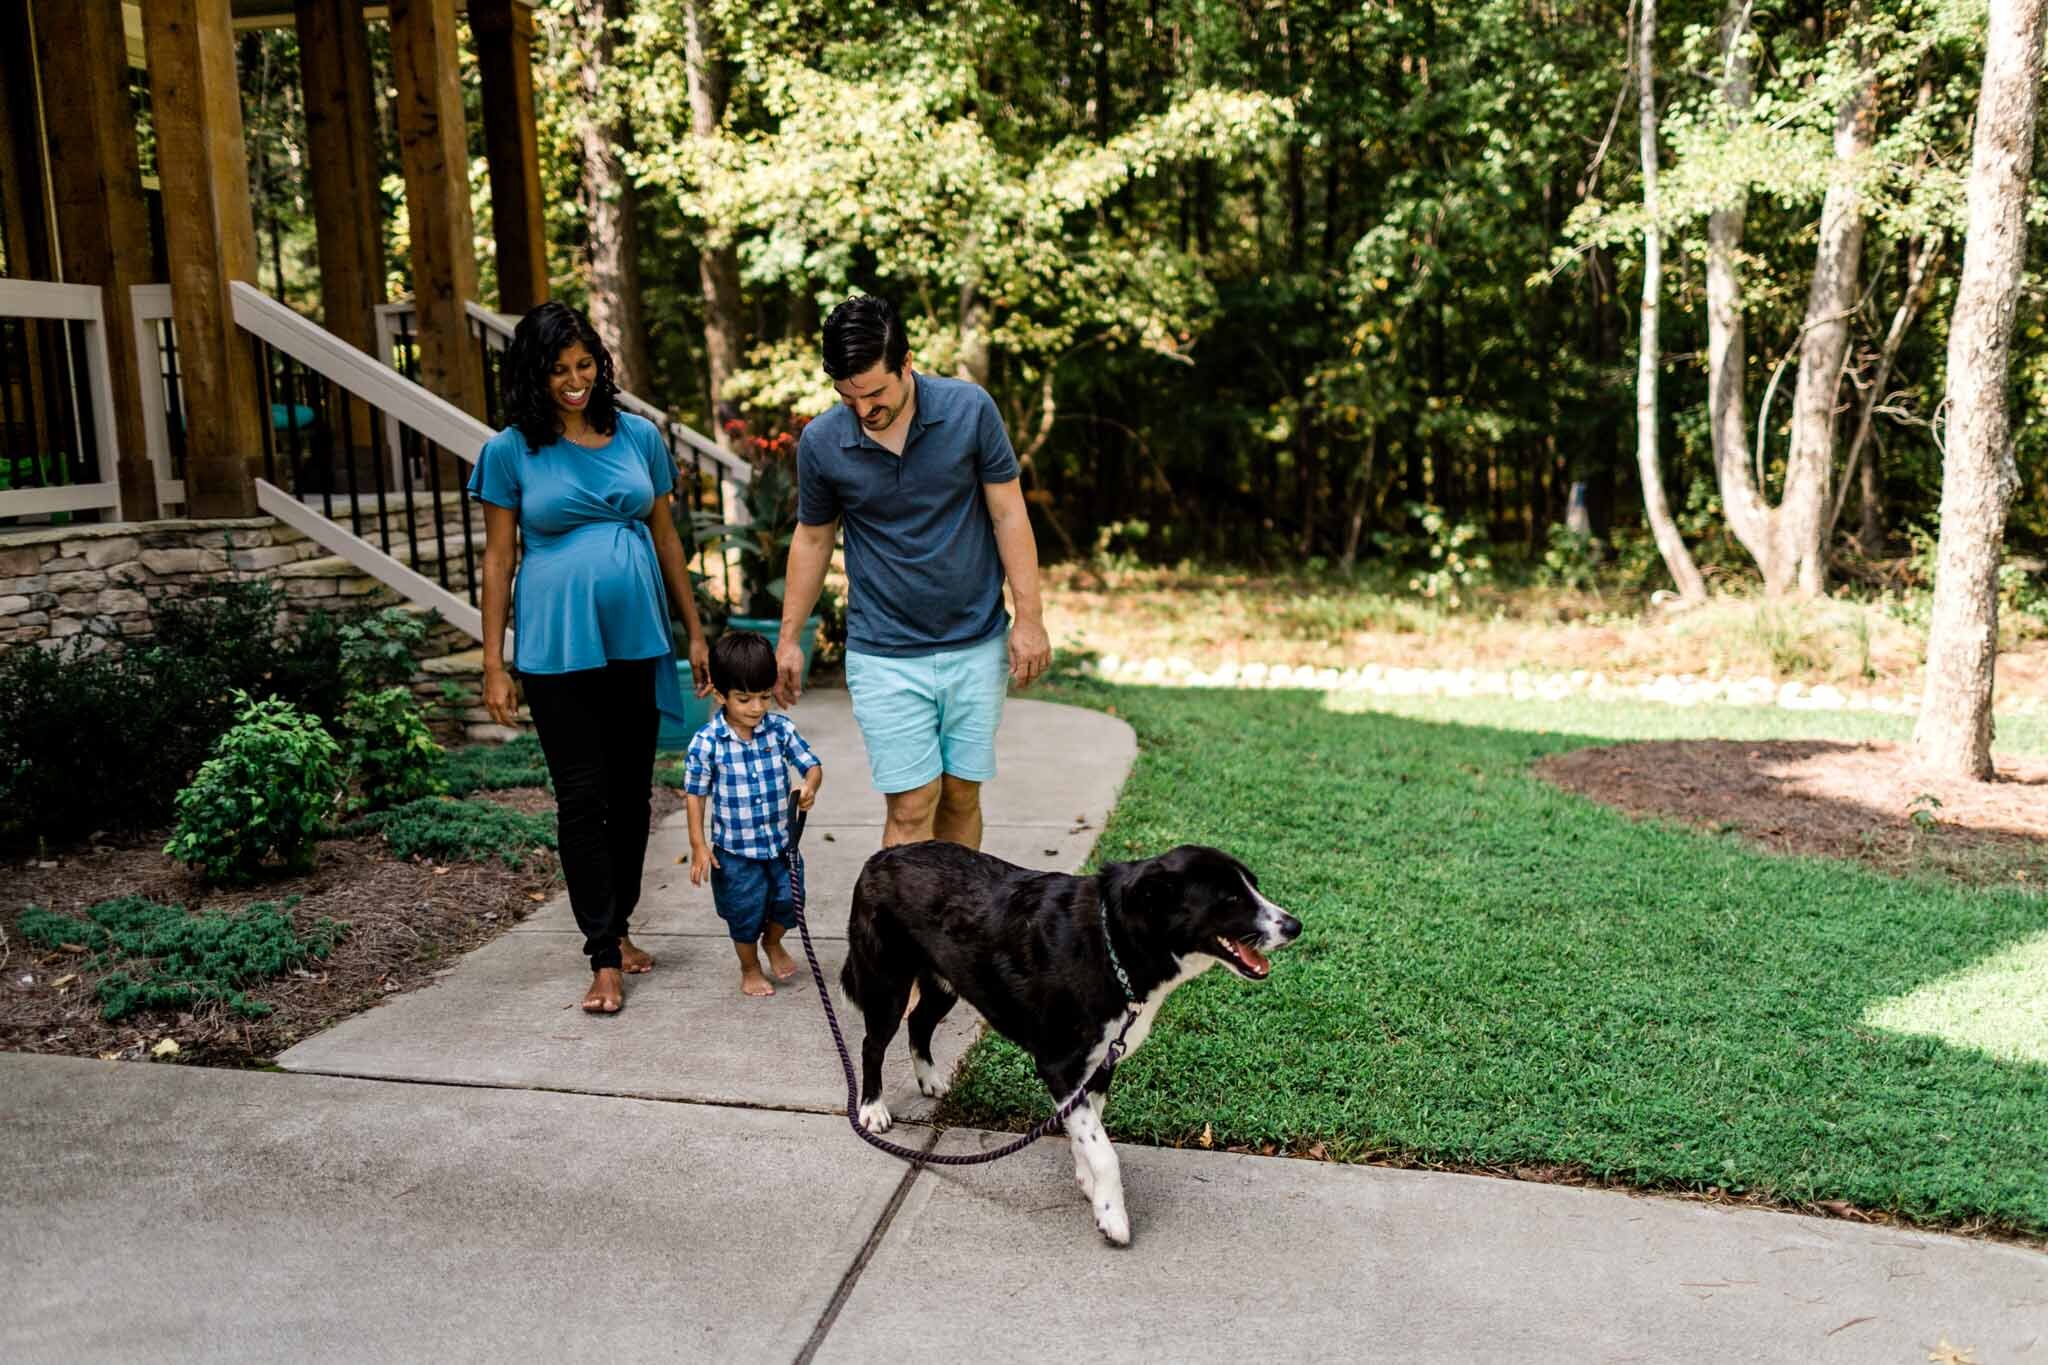 Durham Photographer | By G. Lin Photography | Lifestyle Session at Home | Family walking dog outside and smiling